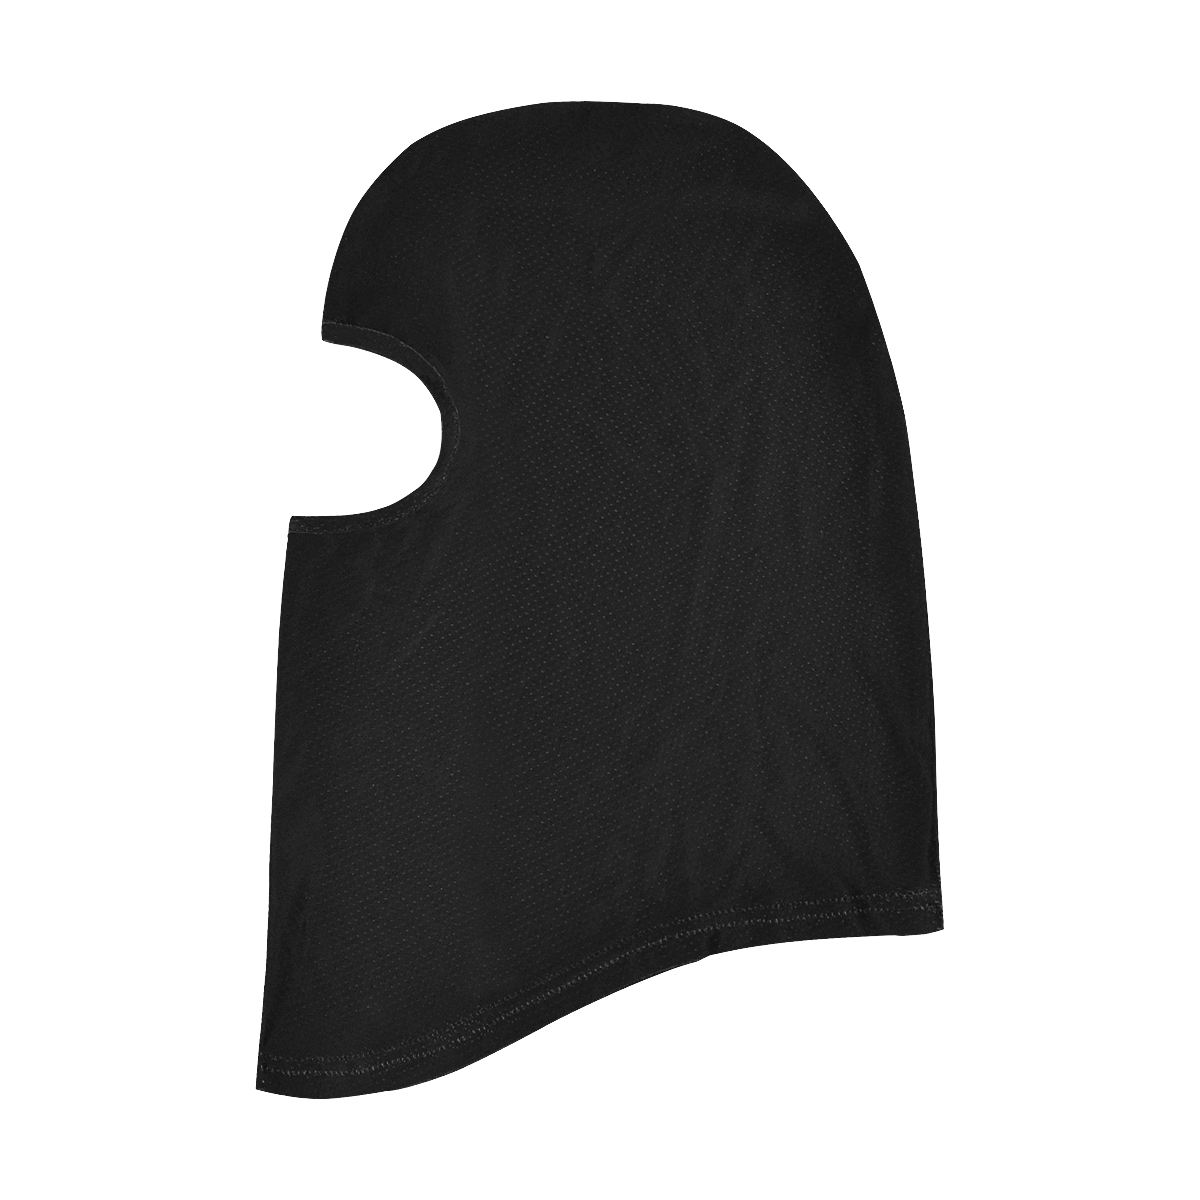 Motorcycle Face Mask Black All Over Print Balaclava